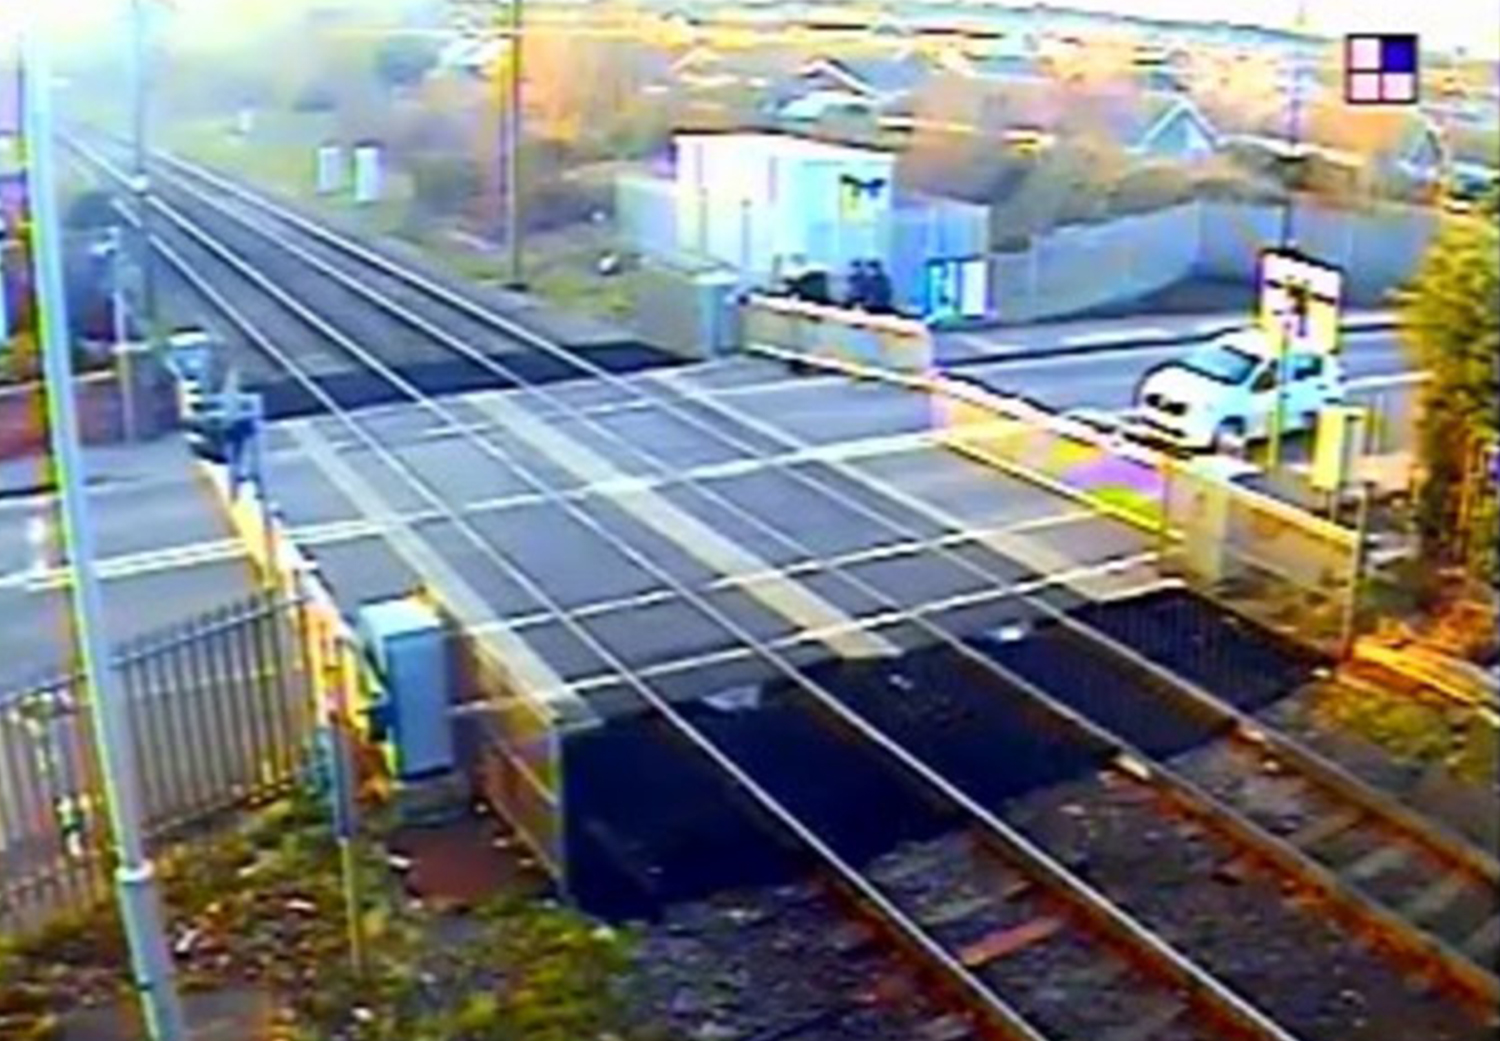 Network Rail Warns People In Doncaster To Use Level Crossings Safely As Shocking Footage Shows